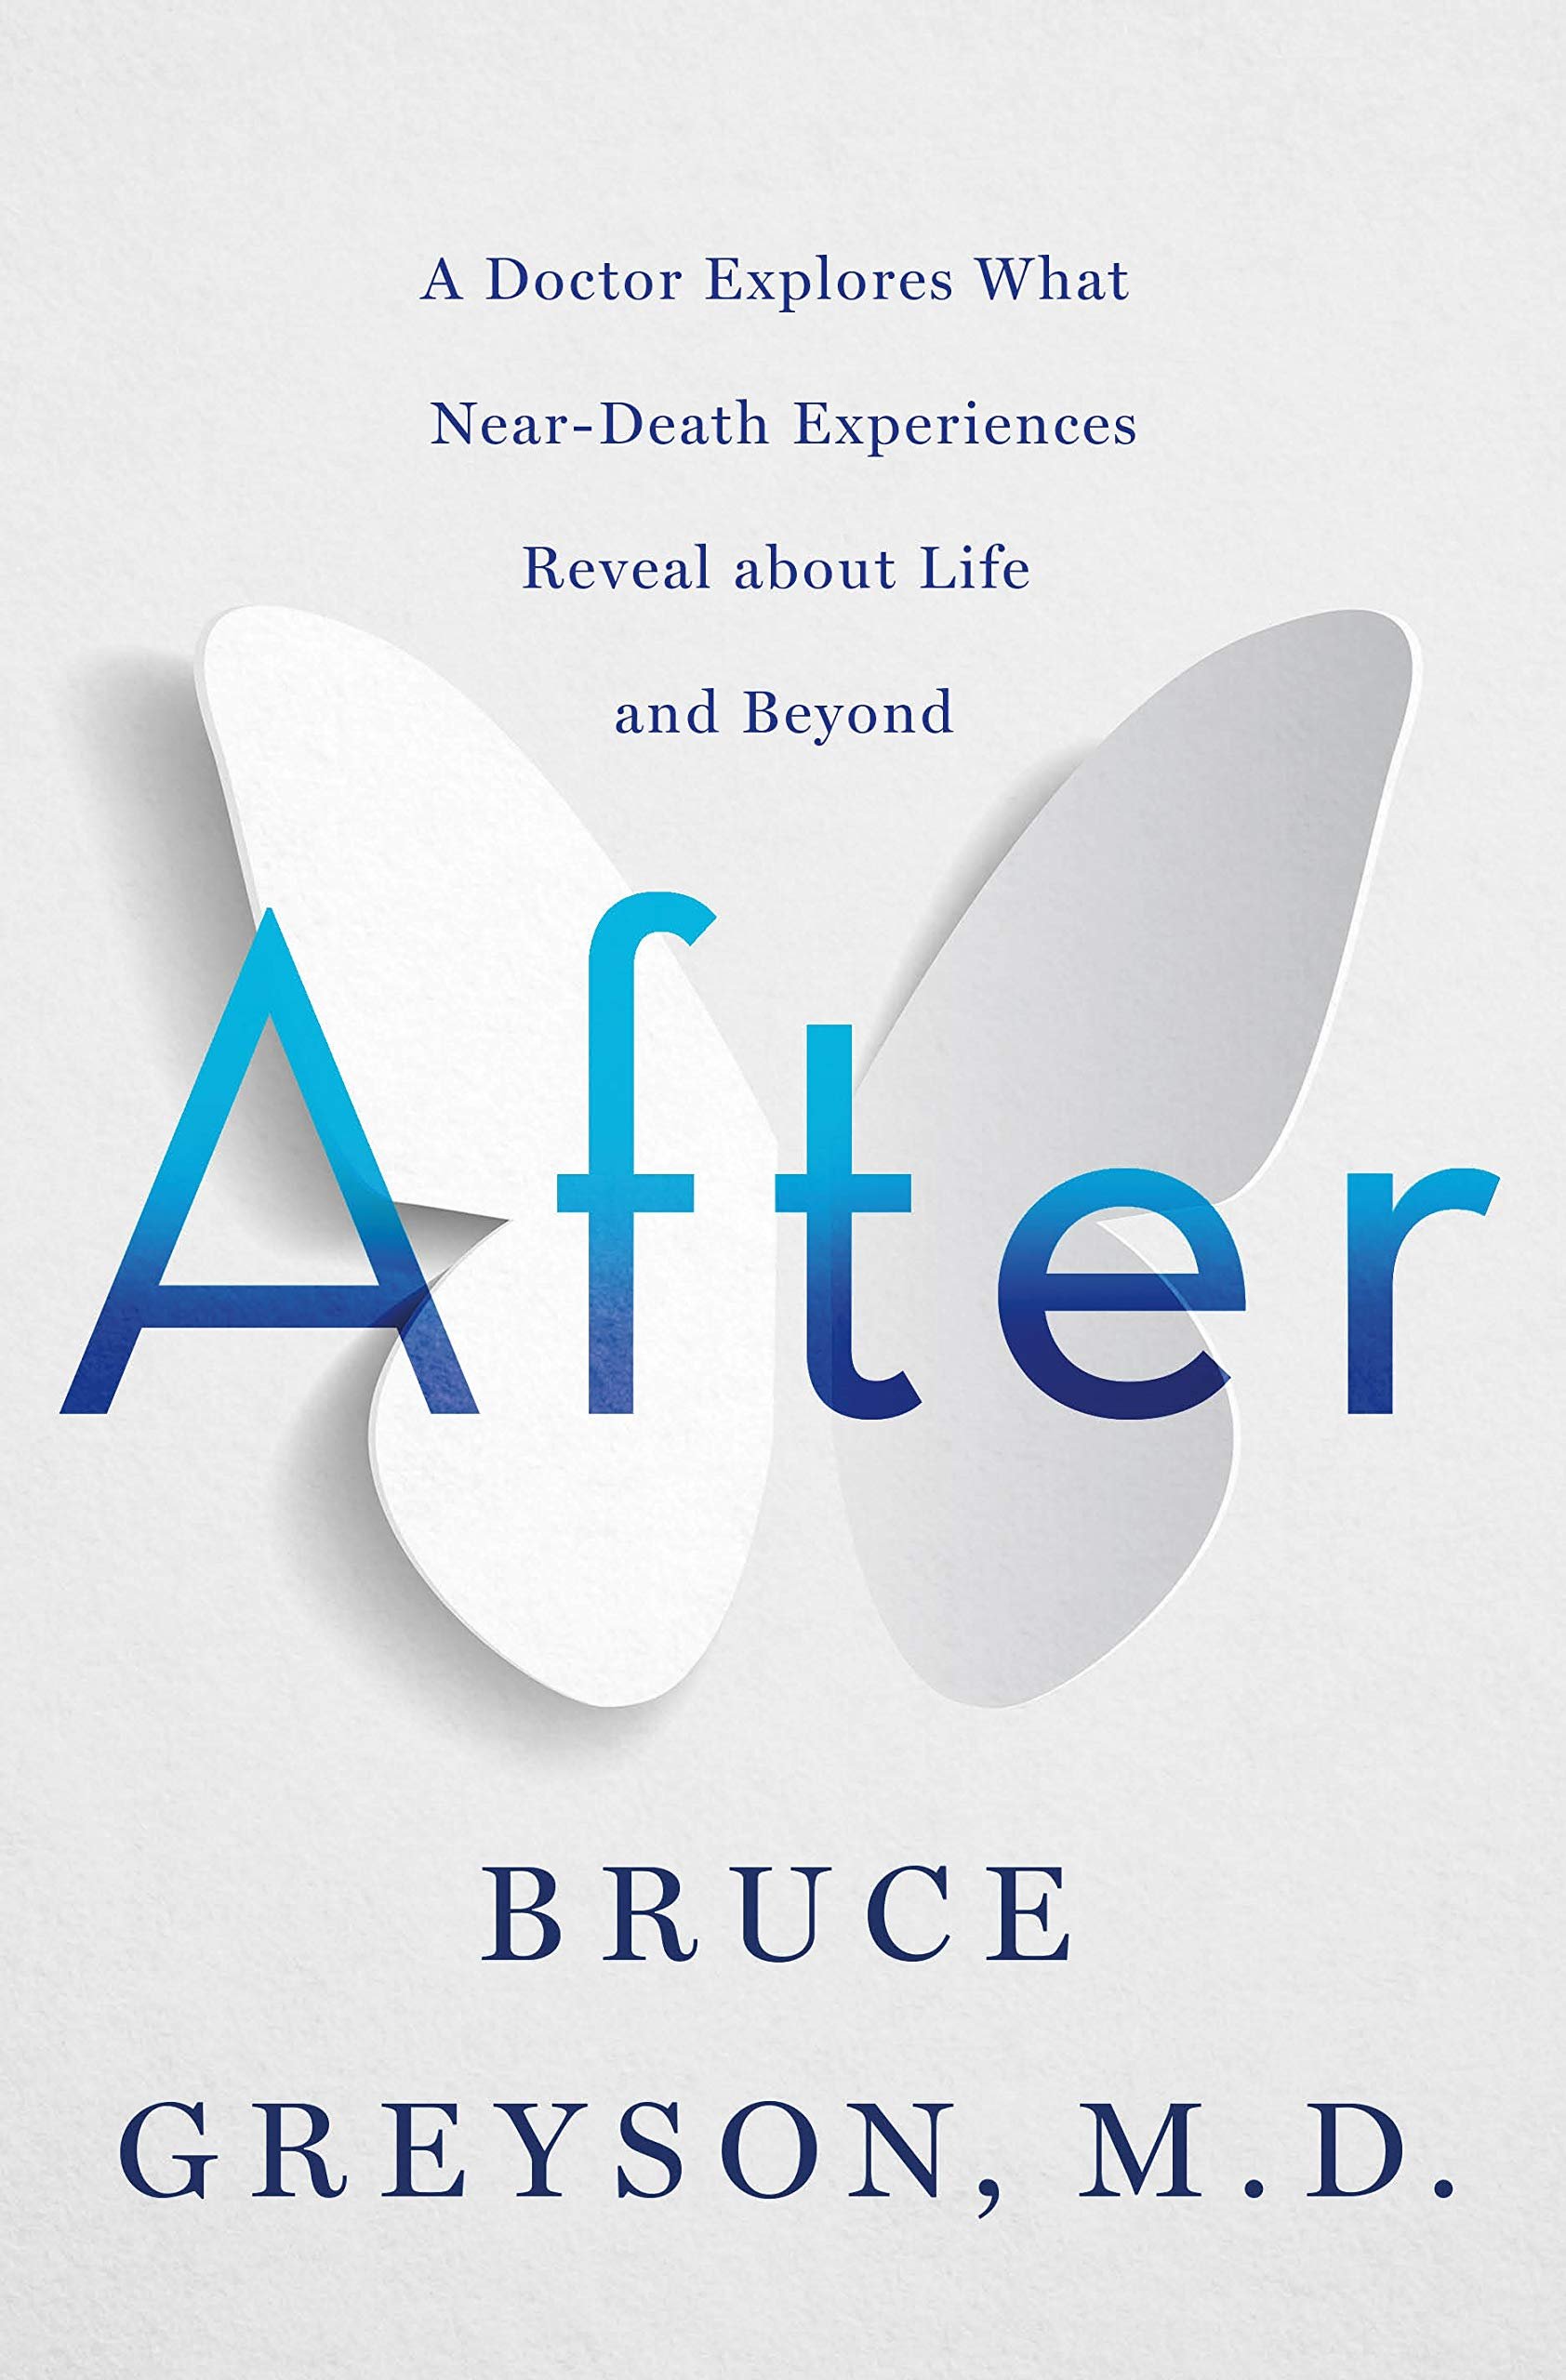 After A Doctor Explores What Near-Death Experiences about Life and Beyond by Bruce Greyson.jpg